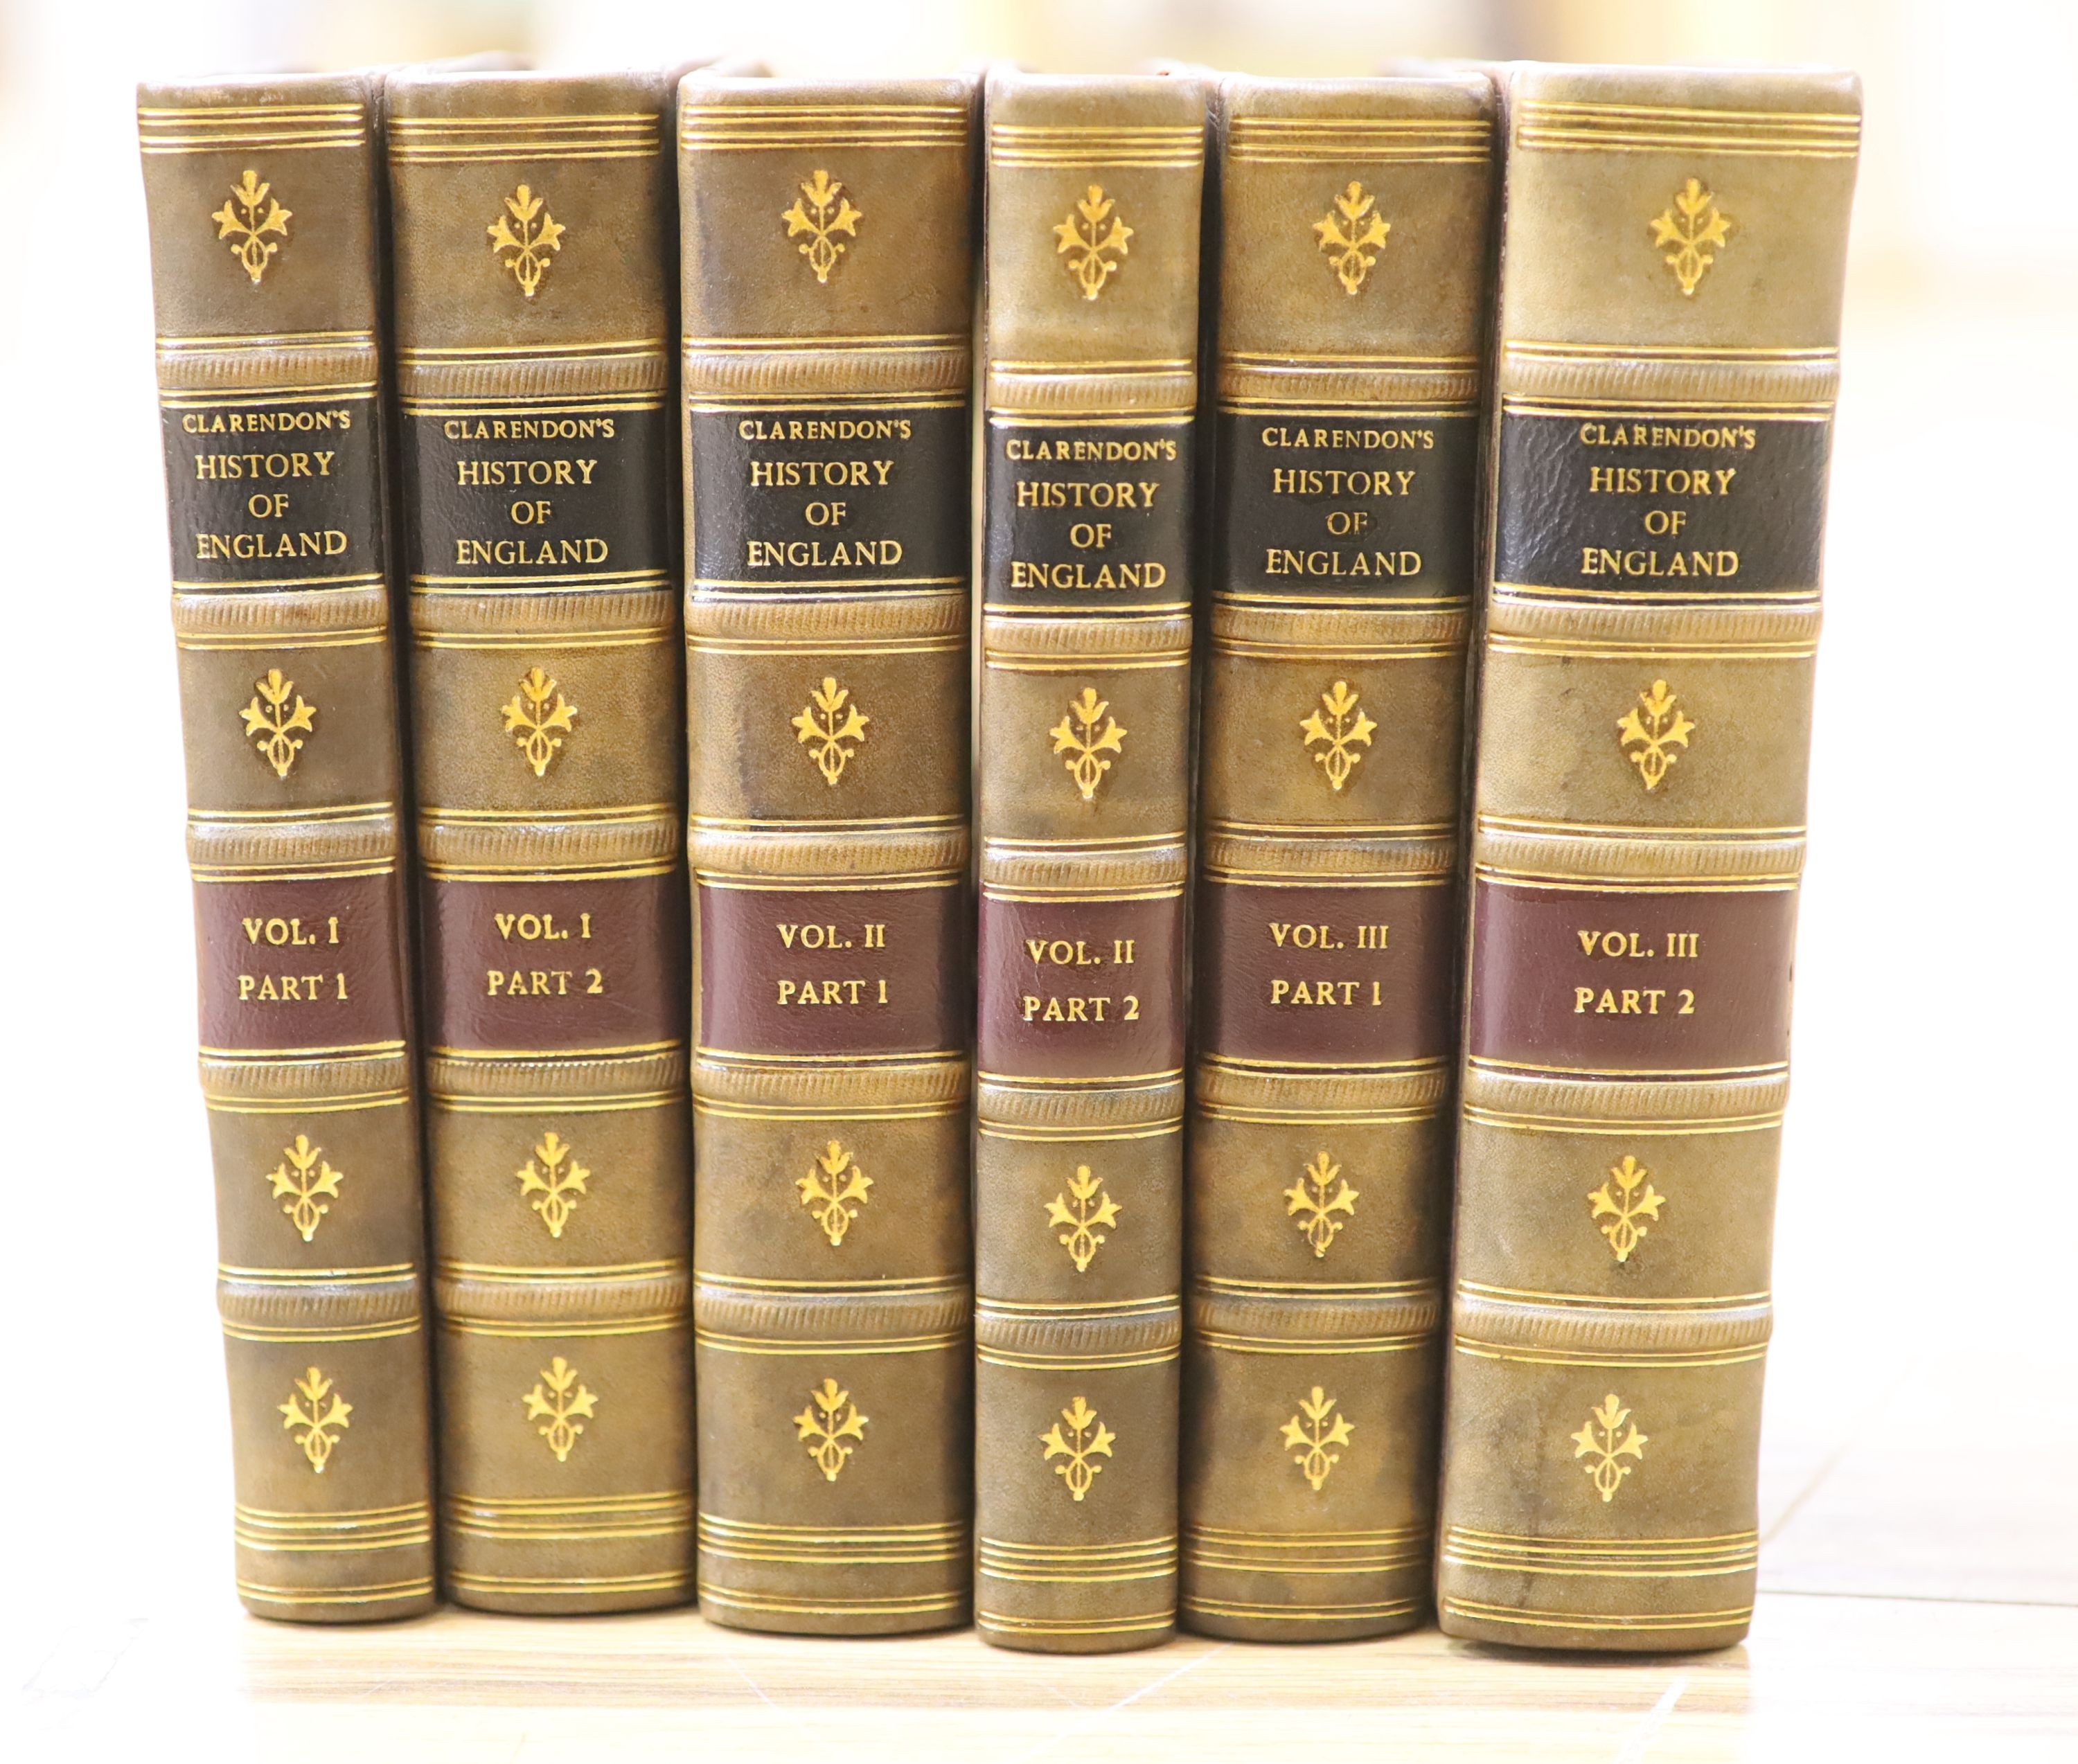 Clarendon, Edward Hyde (earl of) - The History of the Rebellion and Civil Wars in England, Begun in the Year 1641… 1st octavo edition. 3 vols (in 6). Complete with 4 illustrated frontispieces. Re-bound with old, panelled